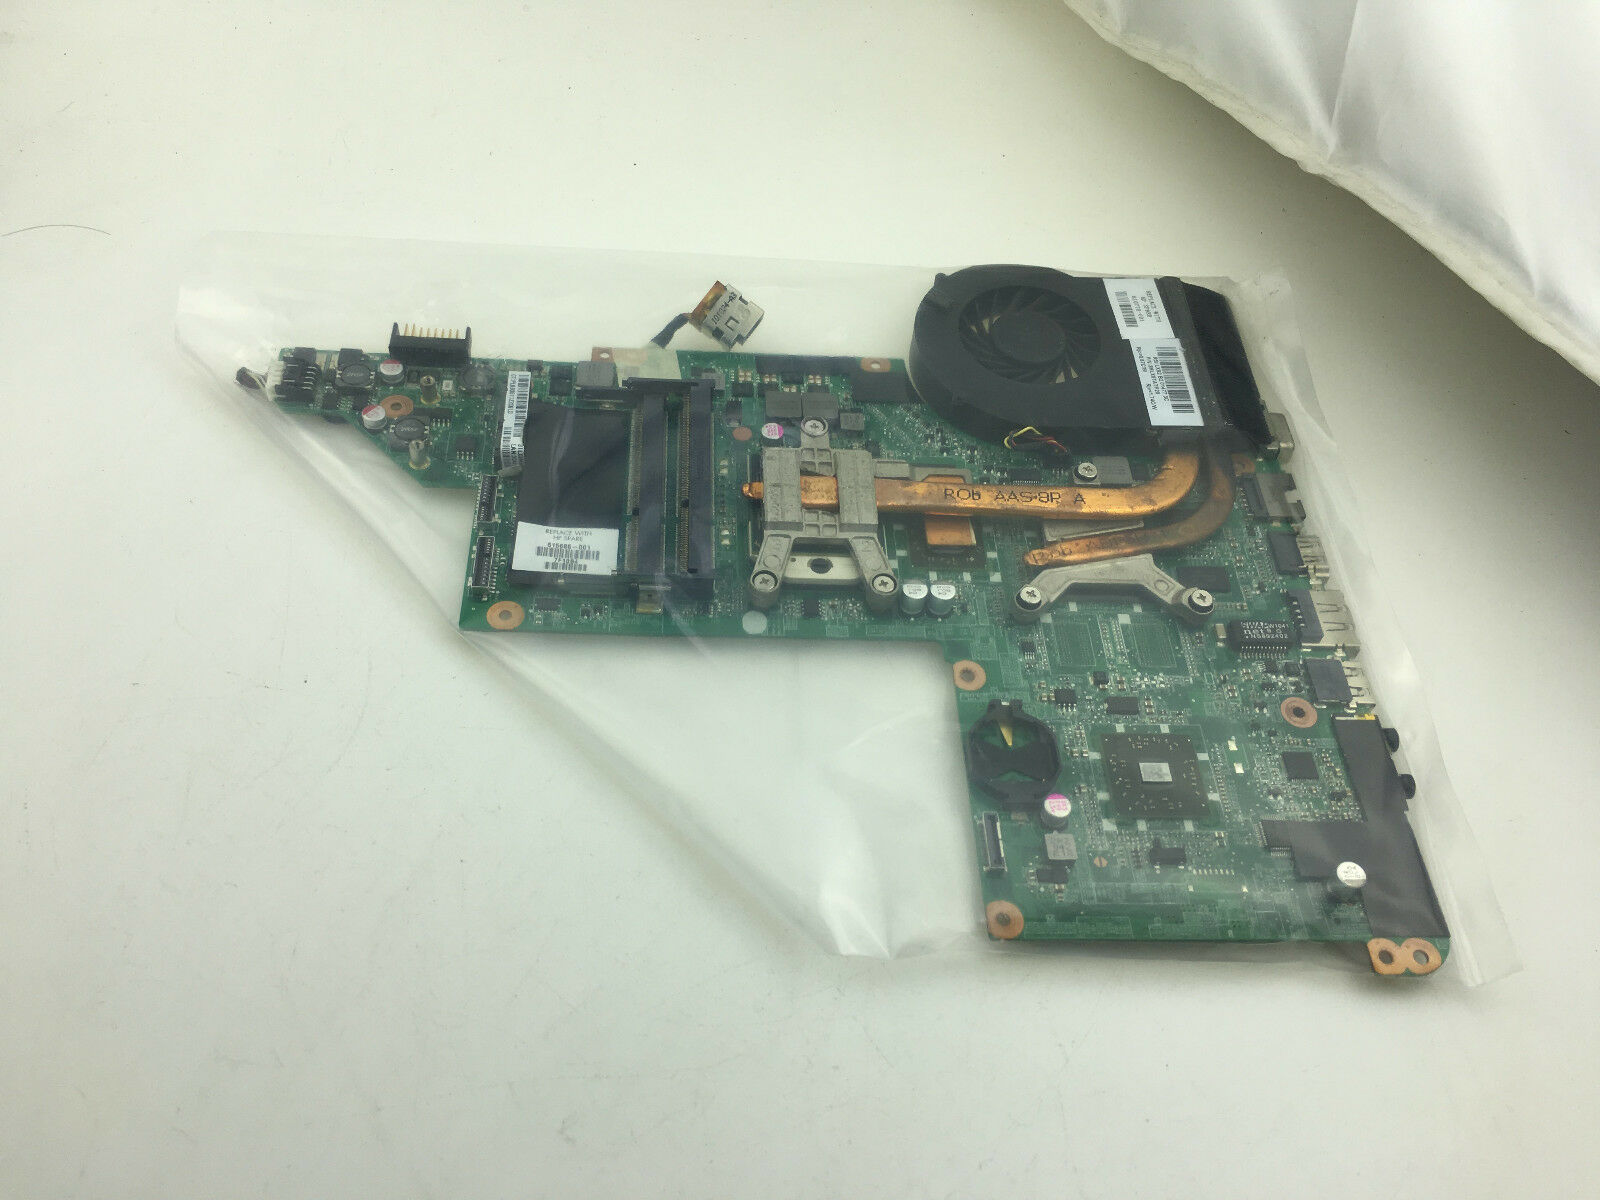 615686-001 AMD S1 Motherboard, for HP DV7 DV7-4000 Series Laptop, DA0LX8MB6D1, A Compatible CPU Brand: AMD